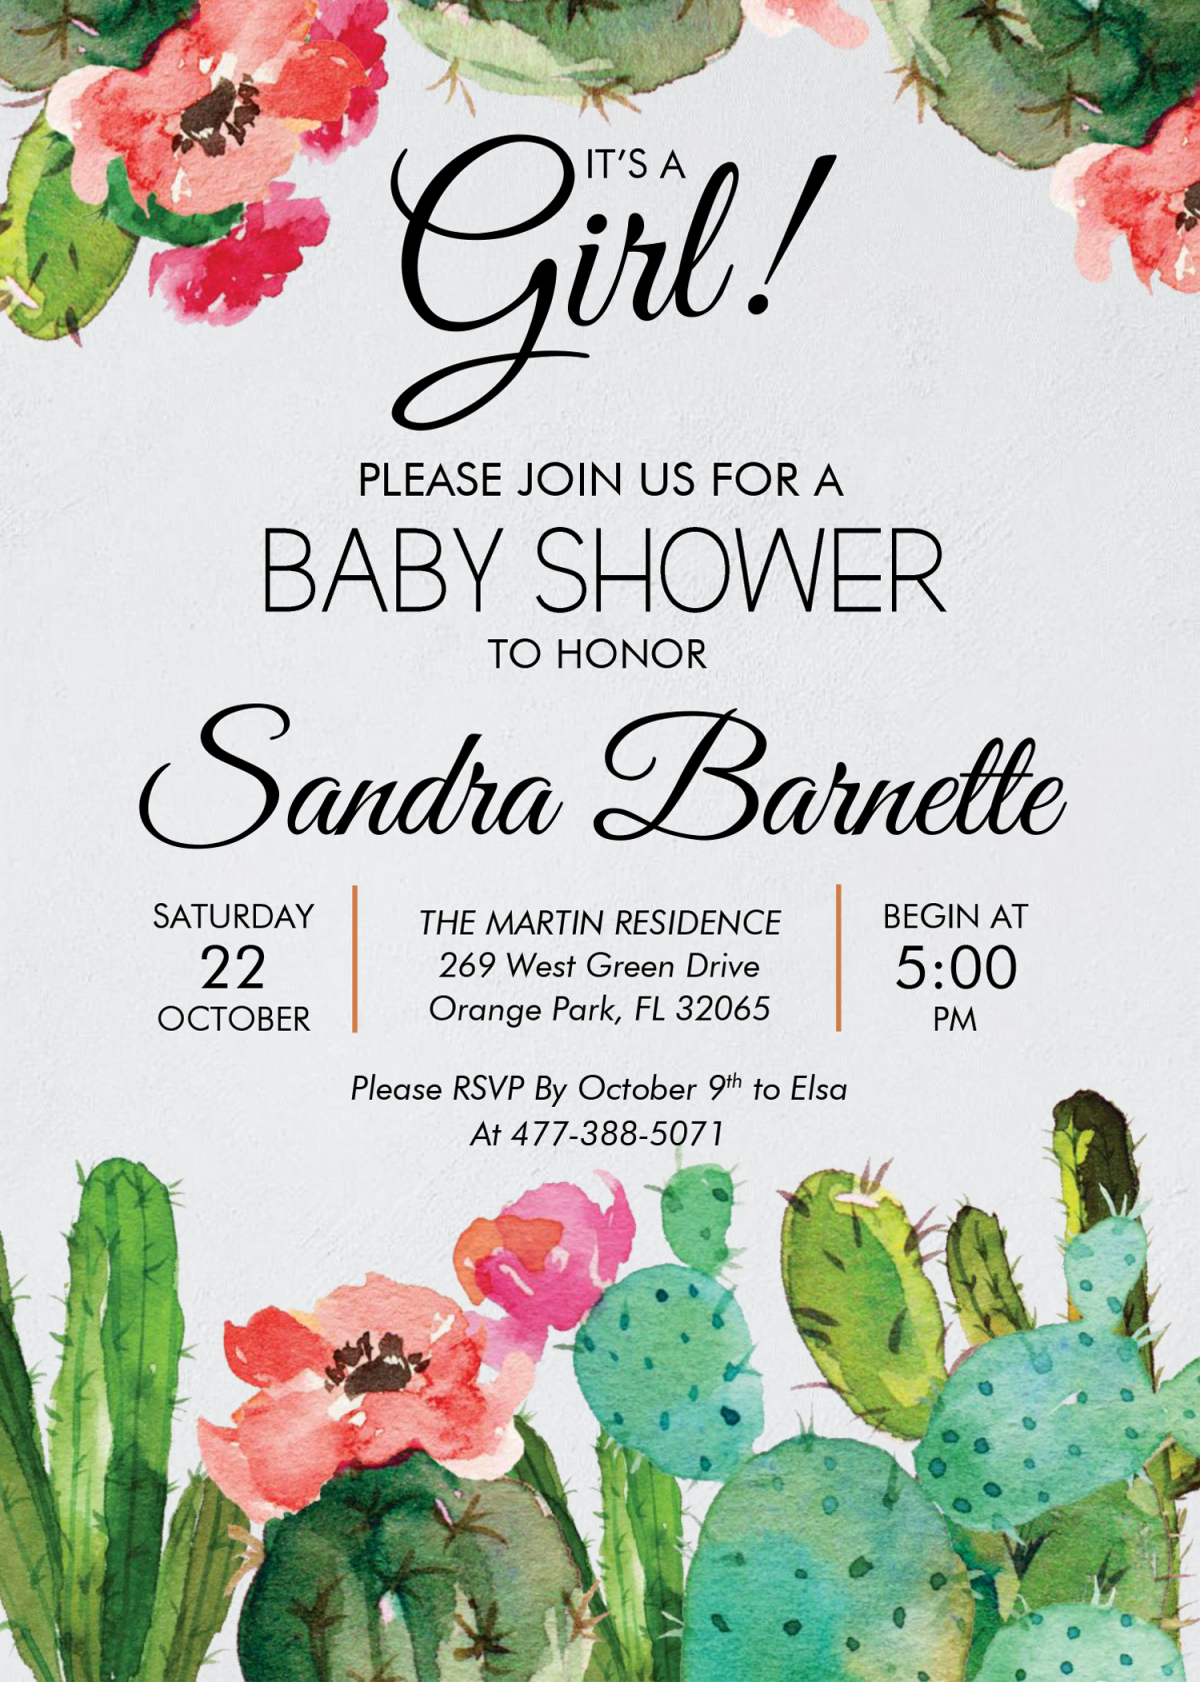 Watercolor Cactus Invitation Templates - Editable With Microsoft Word and has portrait orientation